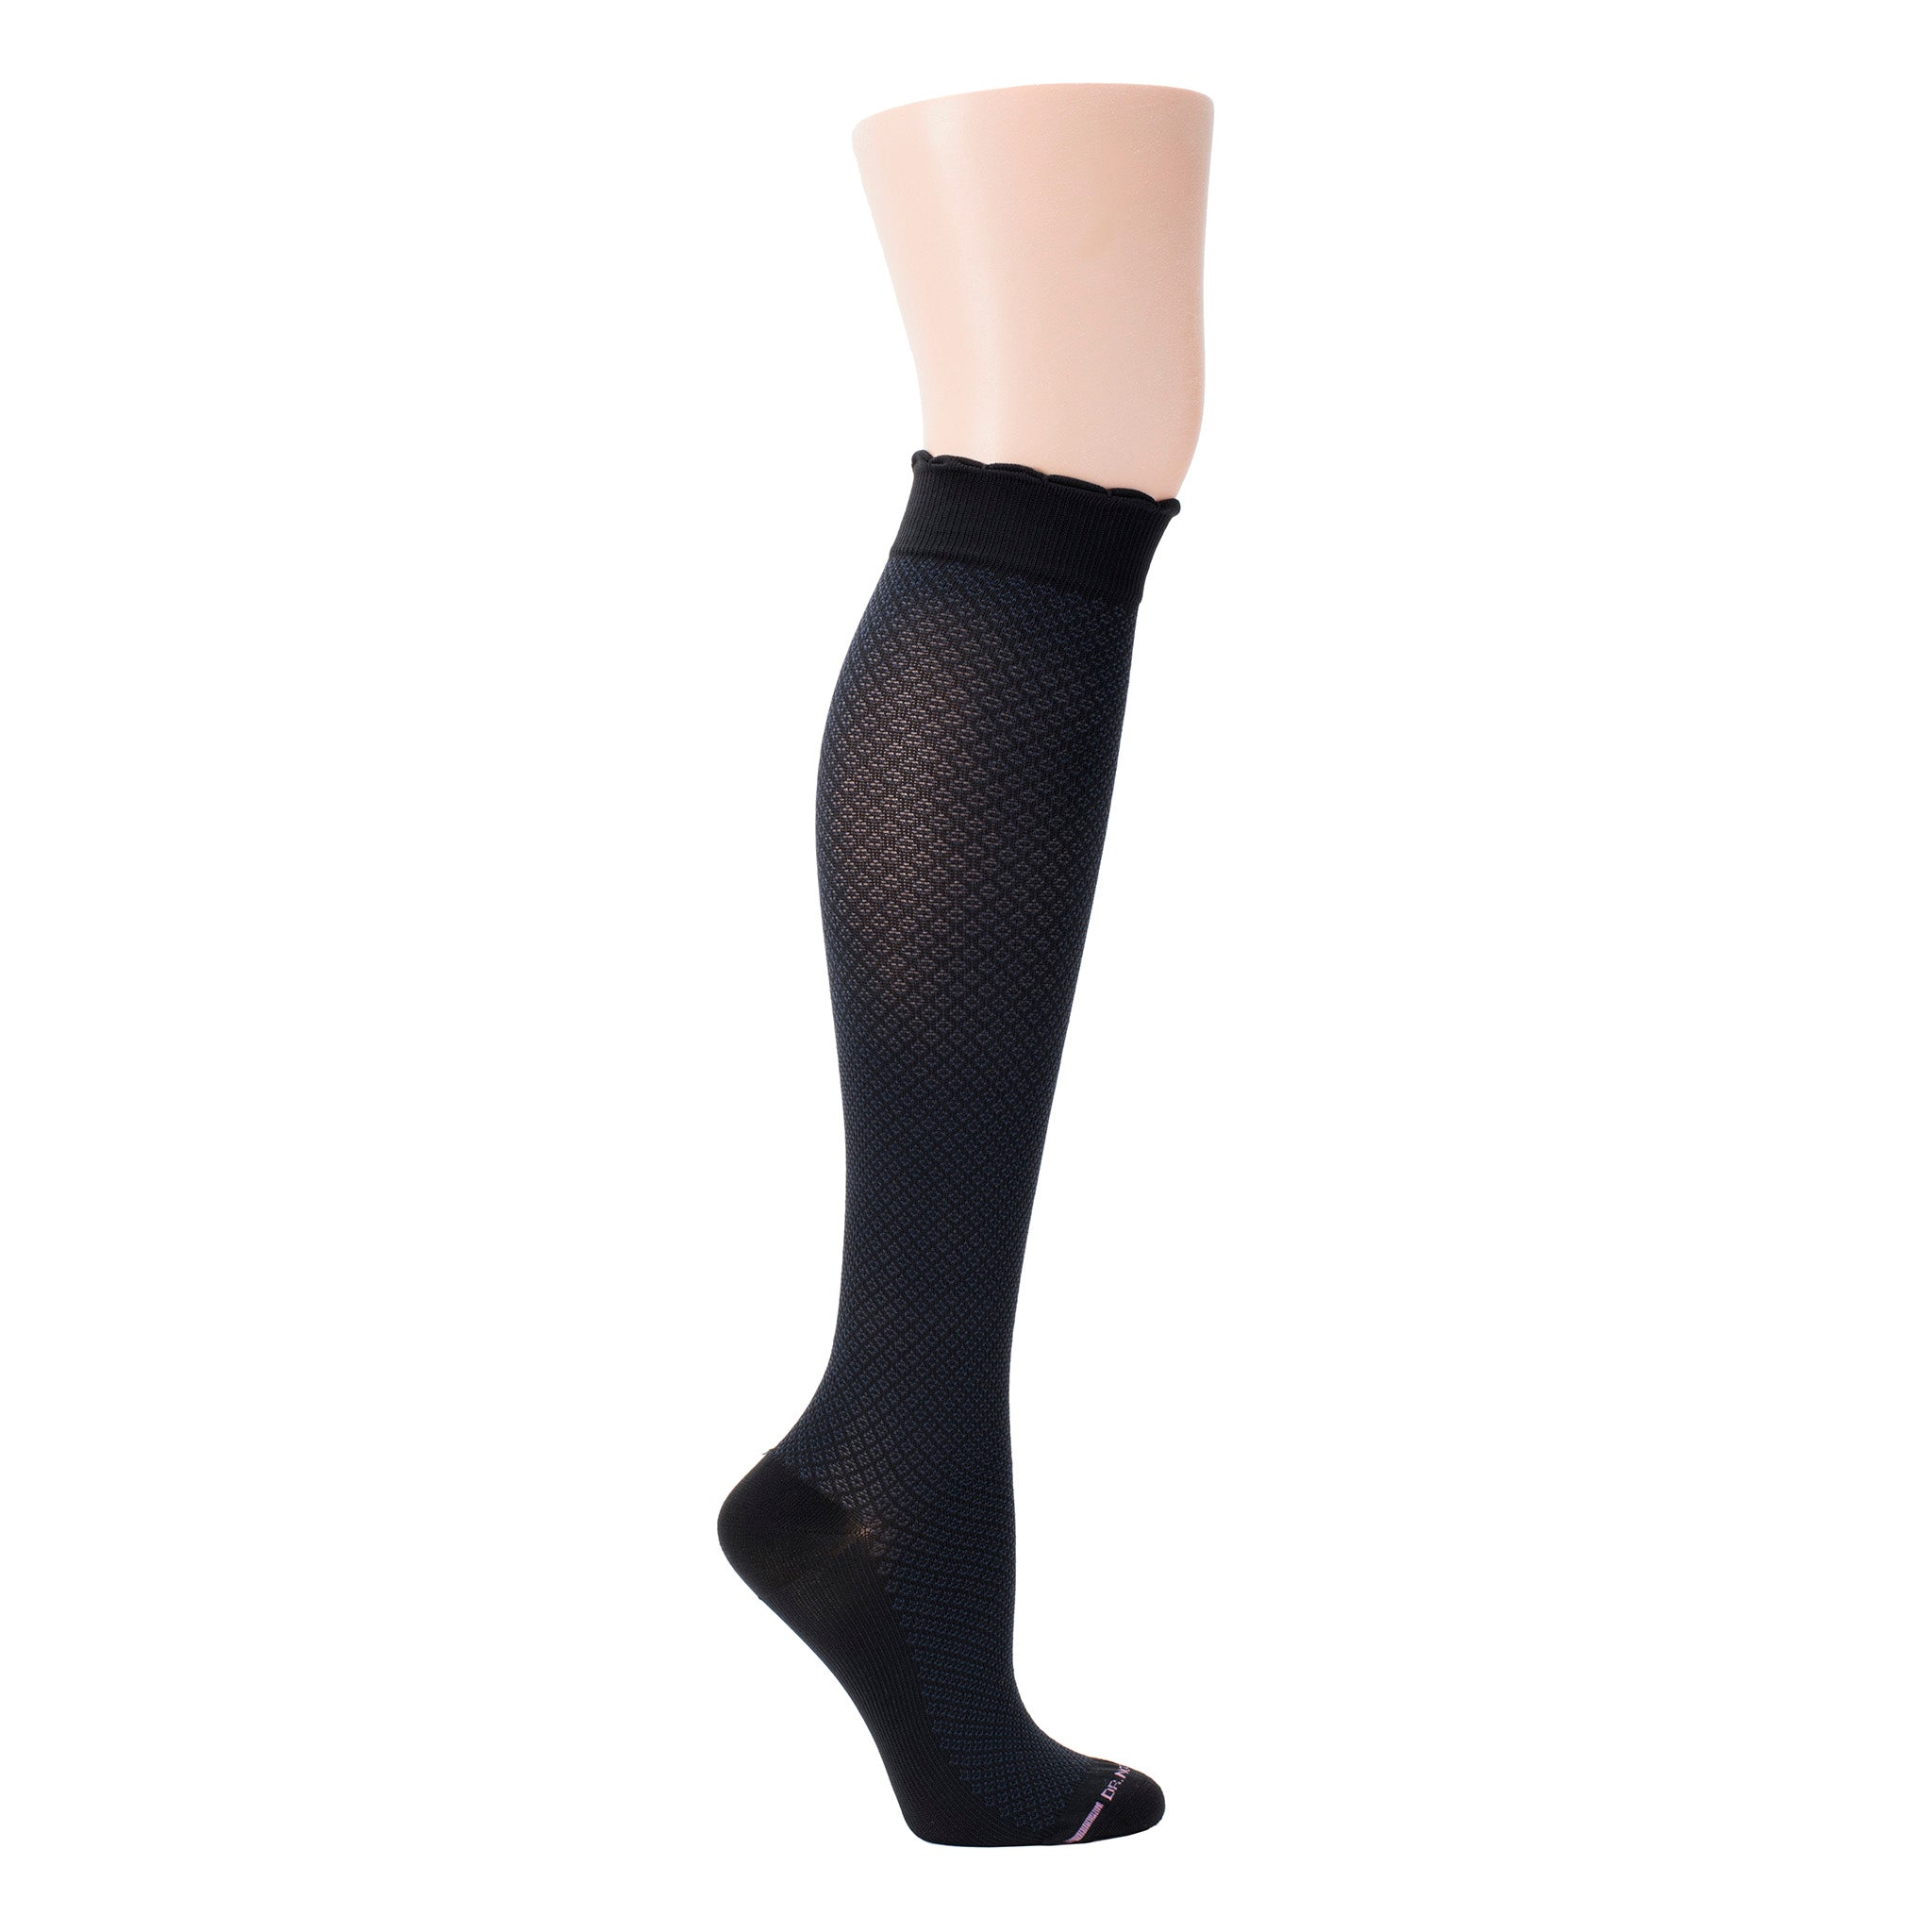 Knee-High Compression Socks For Women | Dr. Motion | Neat Plaiting